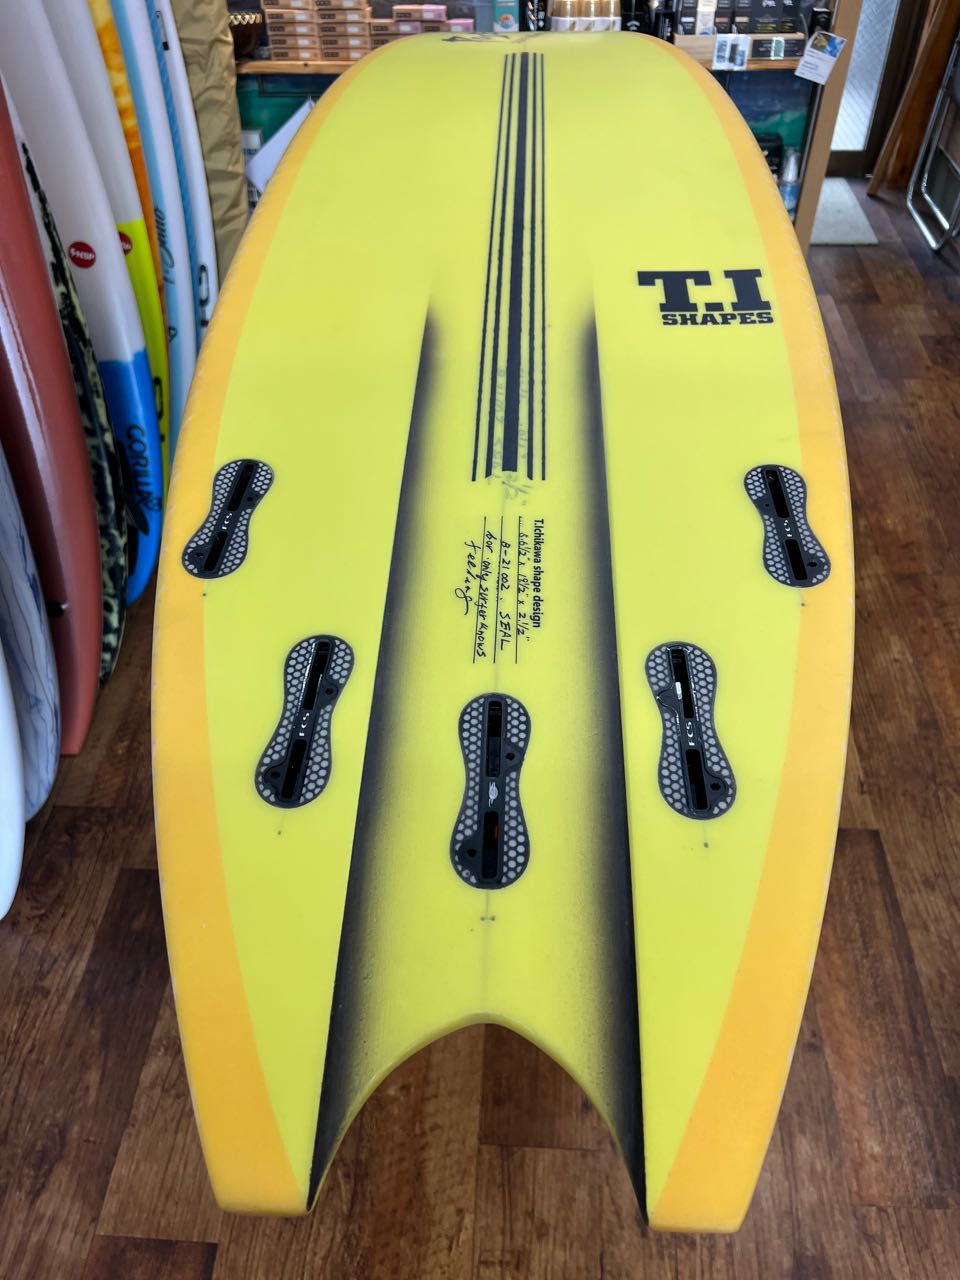 DROPOUT SURFBOARD T.I SHAPESモデルサーフボードTISHAPES状態 ...